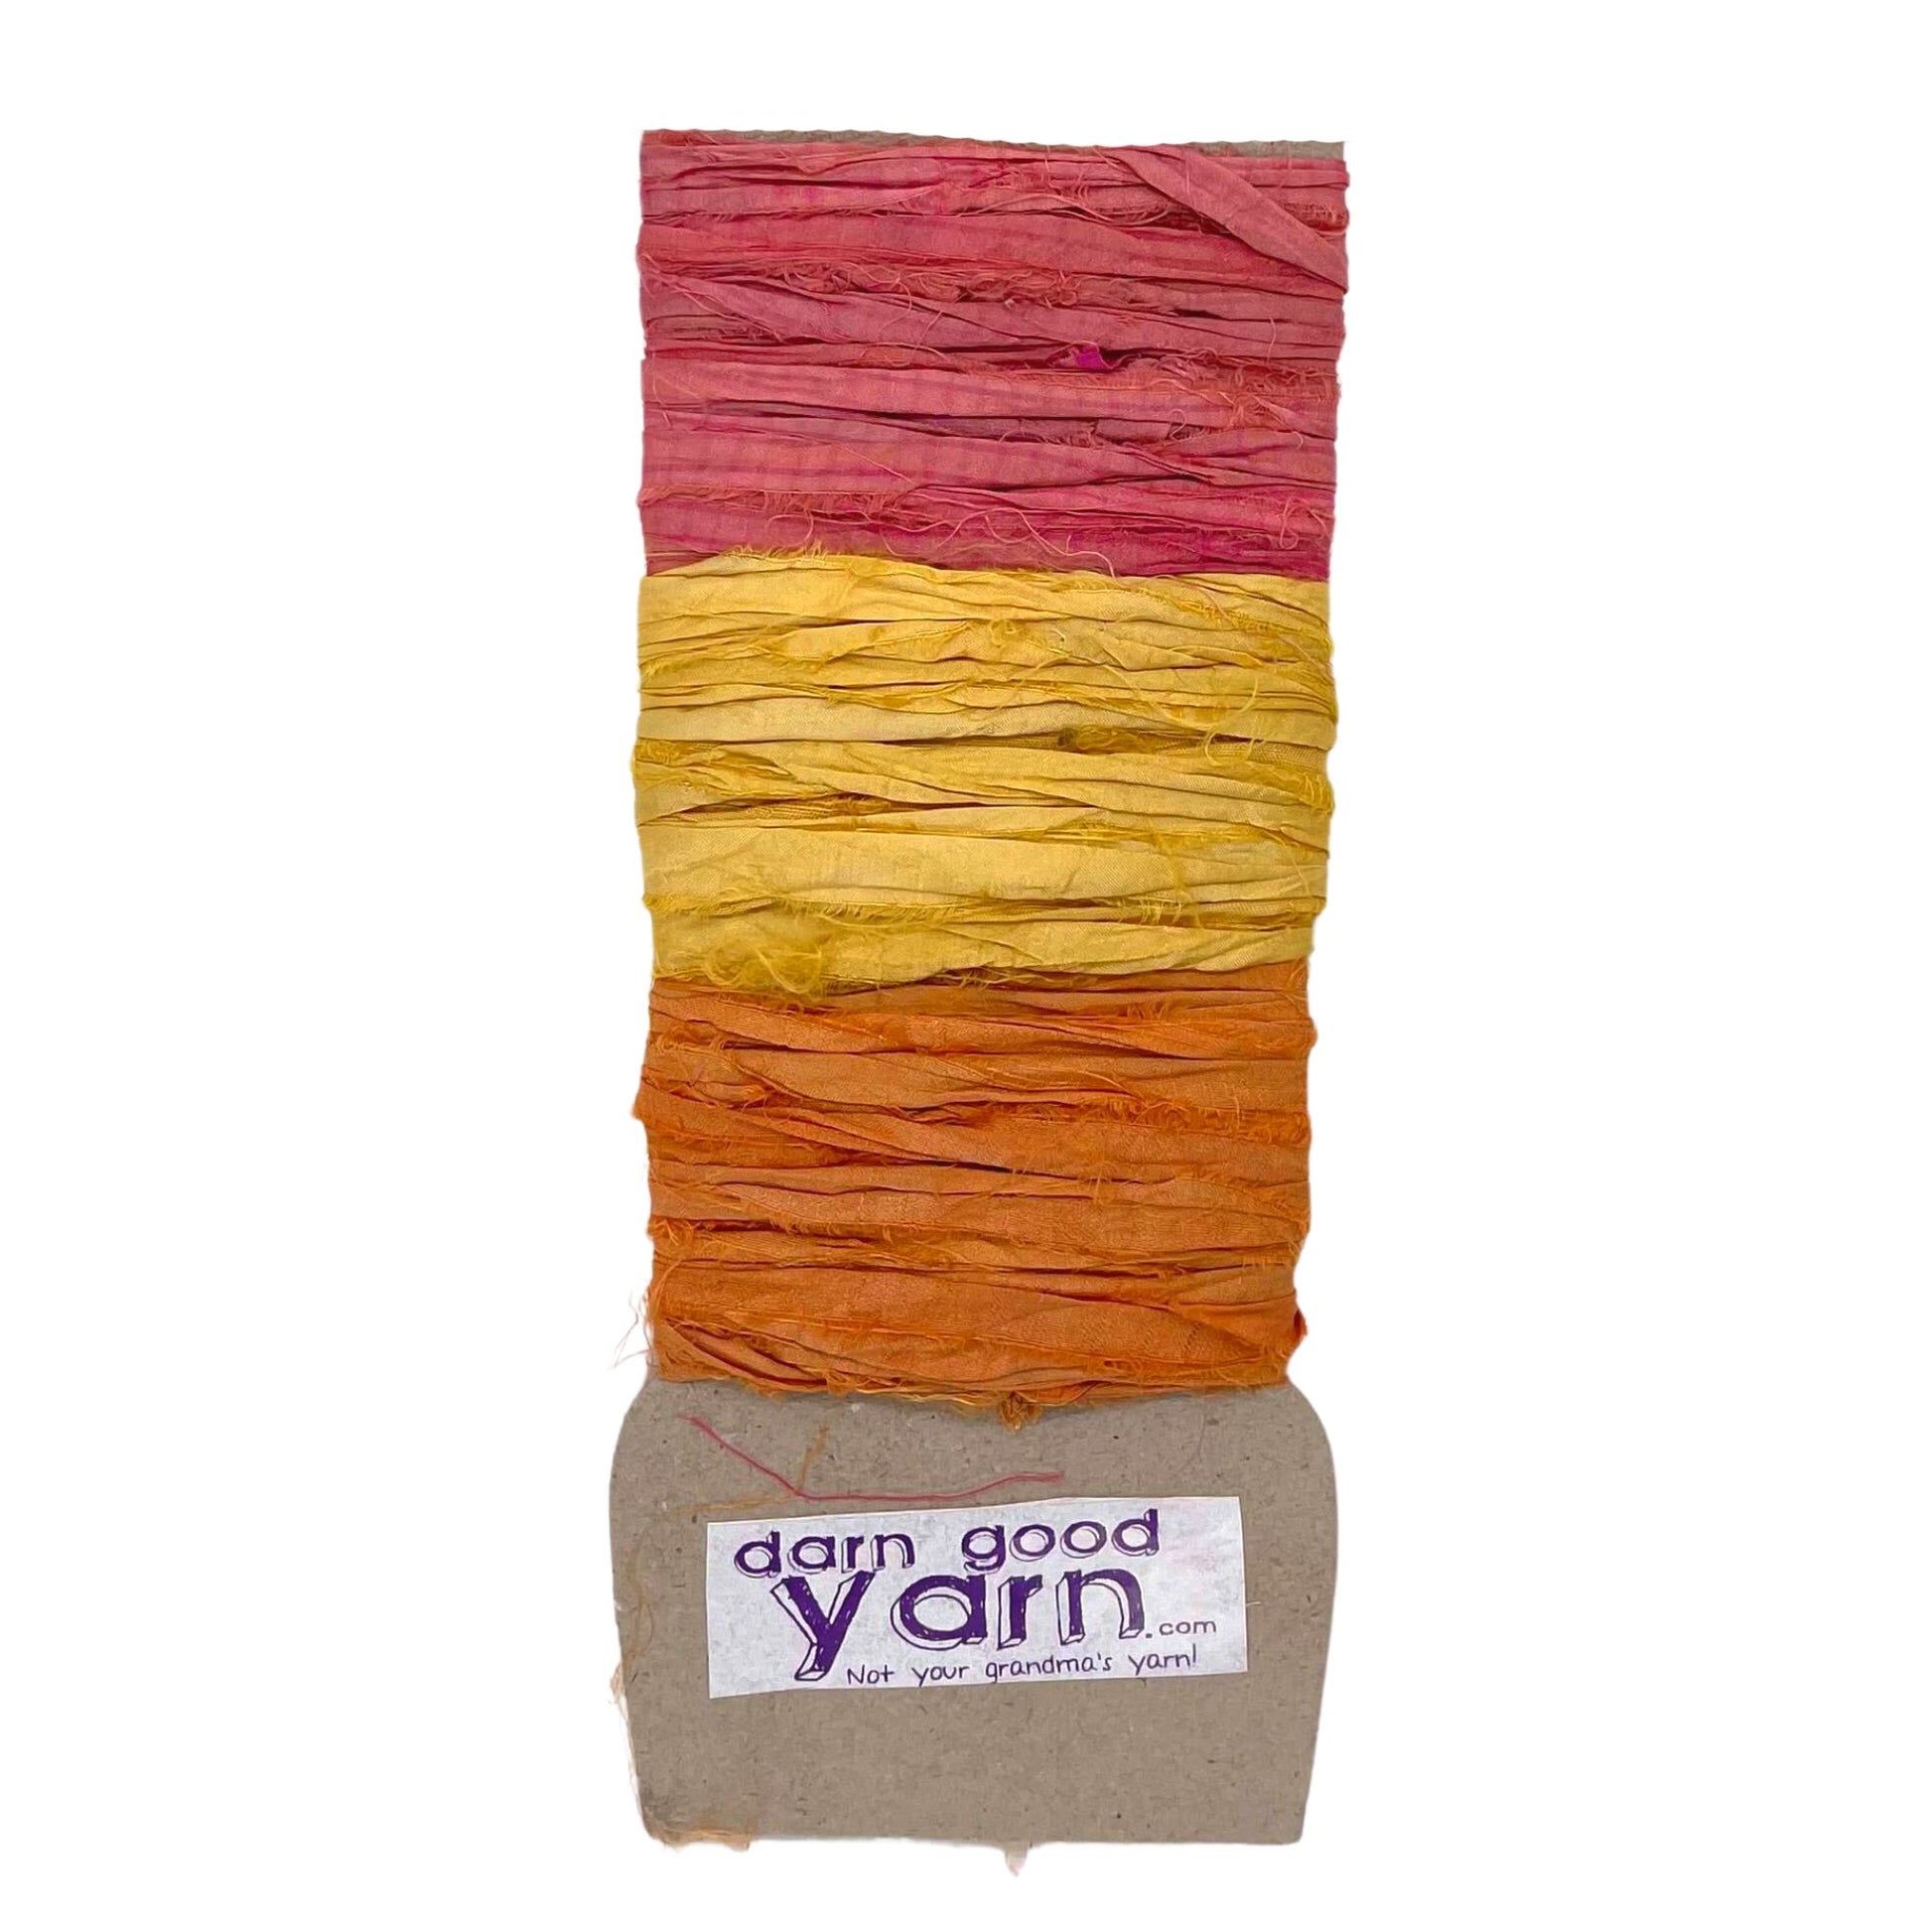 3 shades of sari silk ribbon yarn on a white background. 1 shade of pink, 1 of yellow and one orange